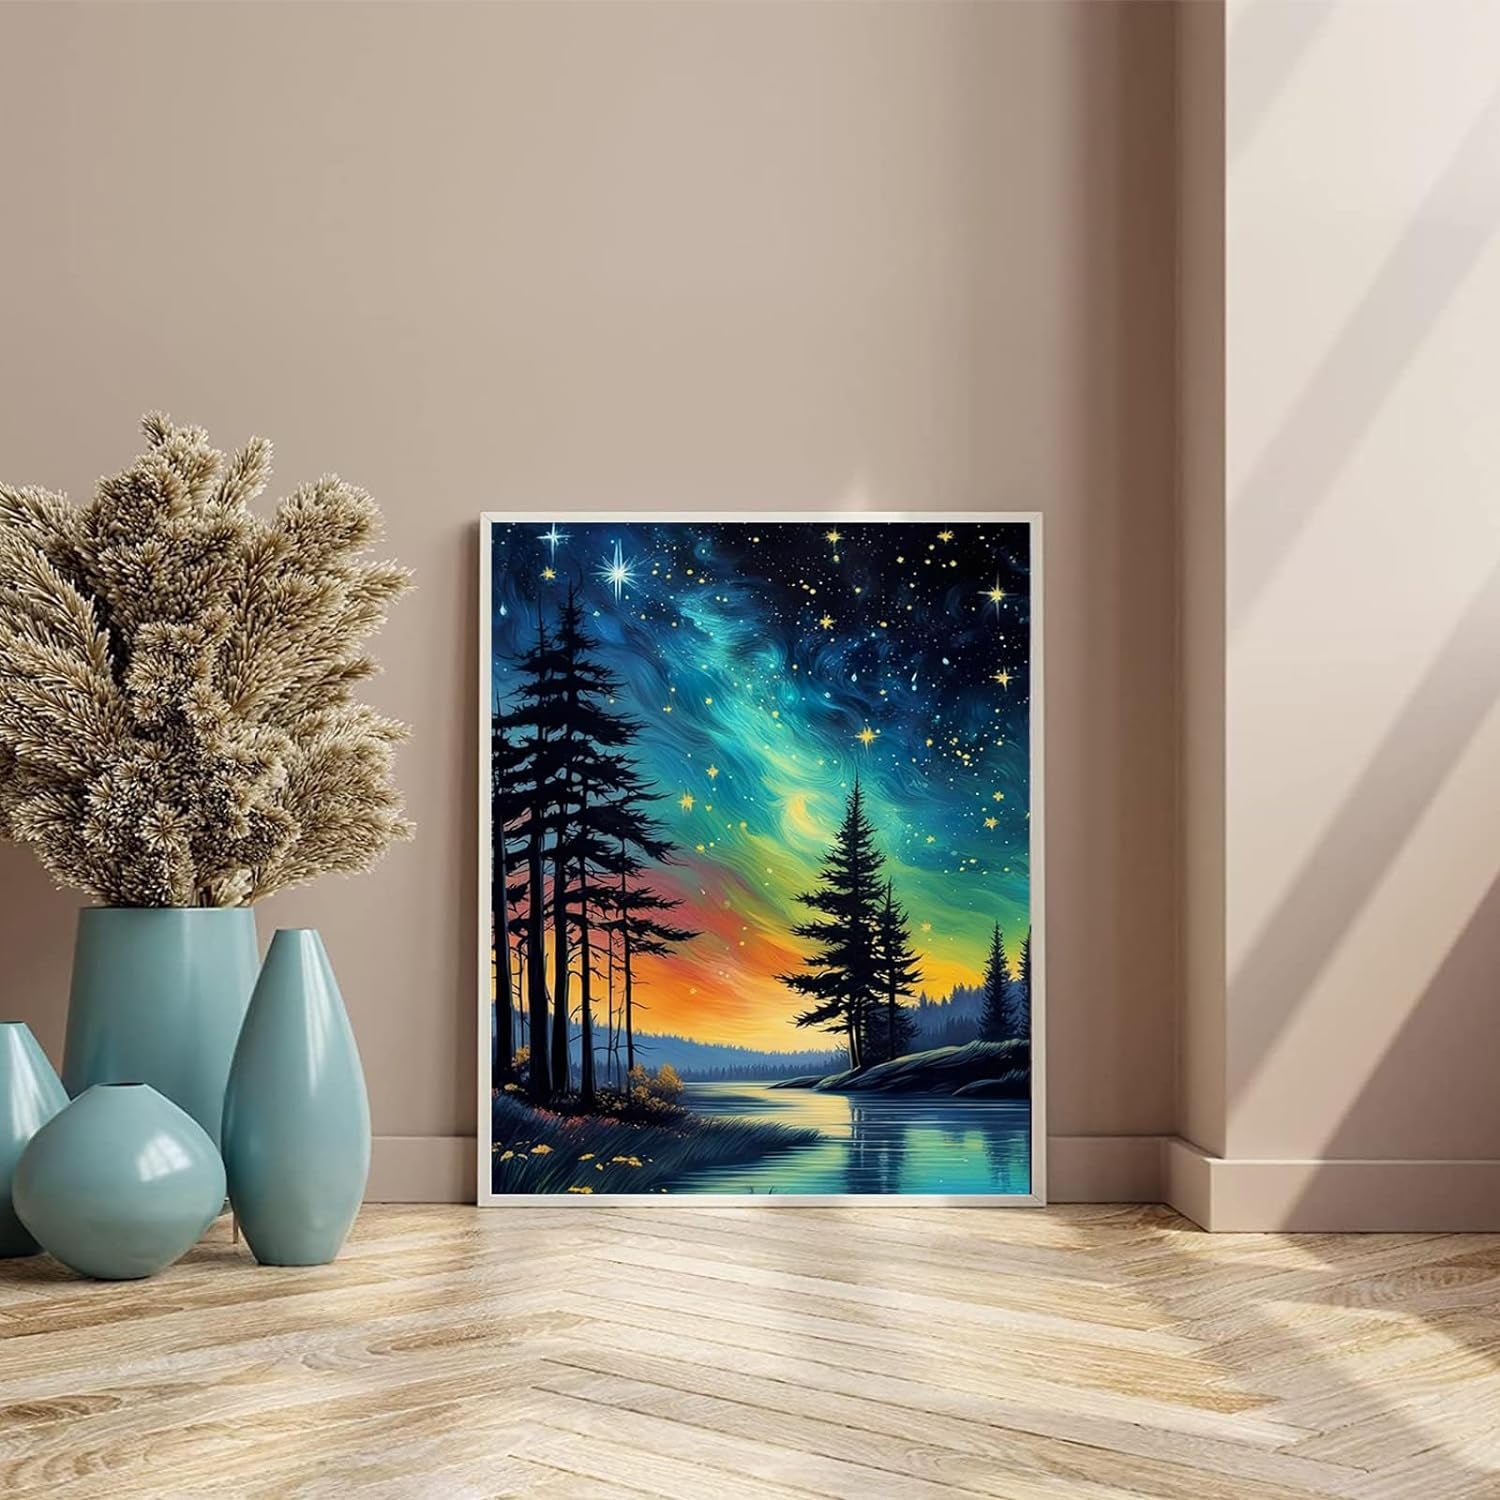 Starry Sky Paint by Numbers for Adults-Starry Night Paint by Number on Canvas without Frame,Diy Abstract Landscape Oil Painting for Gift Home Wall Decor(16X20Inch)